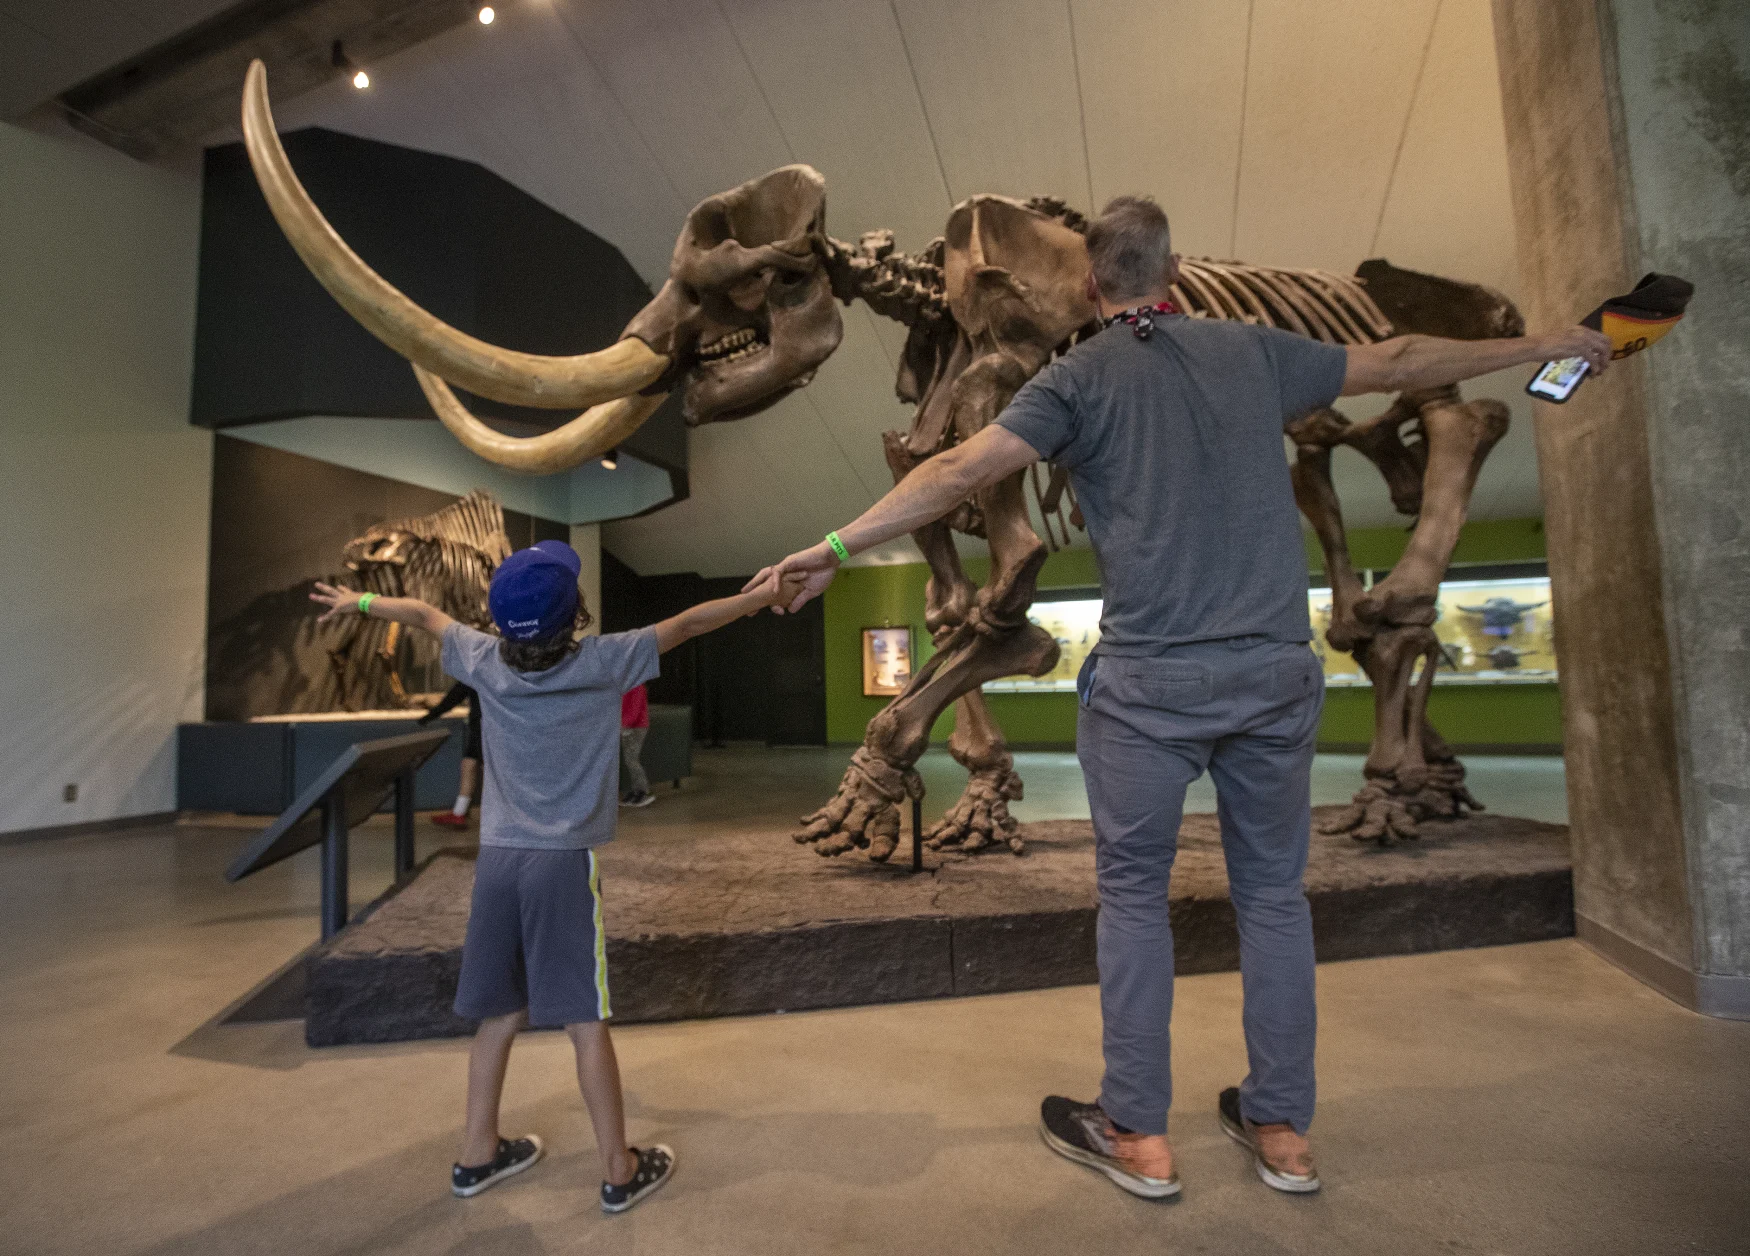 LOS ANGELES, CA - April 8, 2021: Connor Matlen, 6, and his father Logan, 45, of Hawthorne, spread their arms out to try to cover the full length of the American mastodon on display at The La Brea Tar Pits in Los Angeles.  -open to the public after being closed for over a year due to the COVID-19 outbreak.  The American mastodon existed between 2 million and 10,000 years ago.  (Melcon/Los Angeles Times via Getty Images)